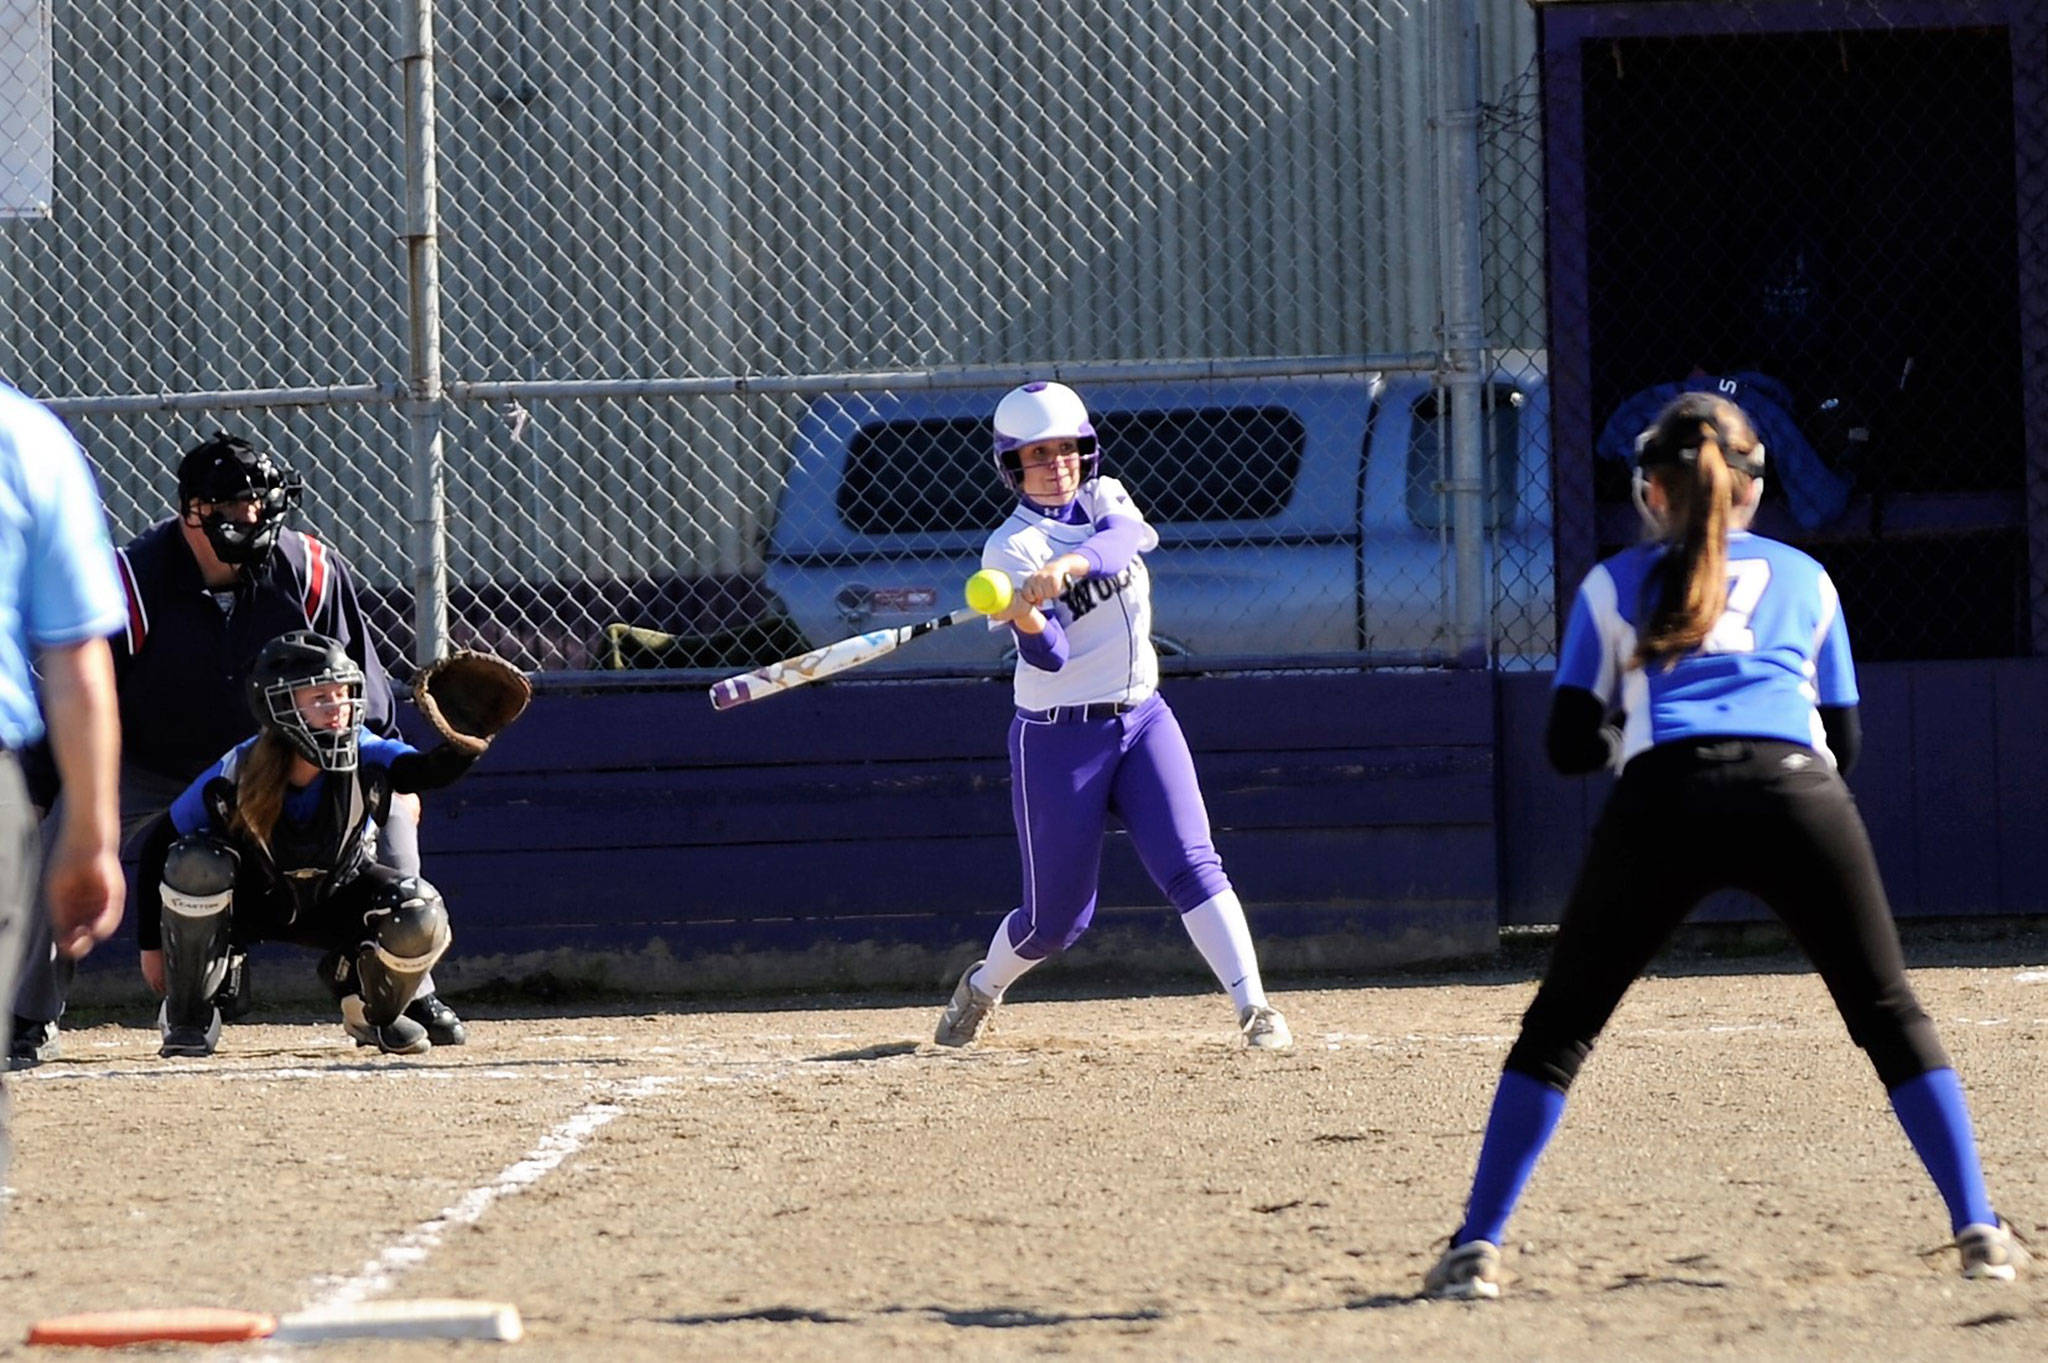 Fastpitch: Wolves blank Bucs, stay in hunt for playoff berth